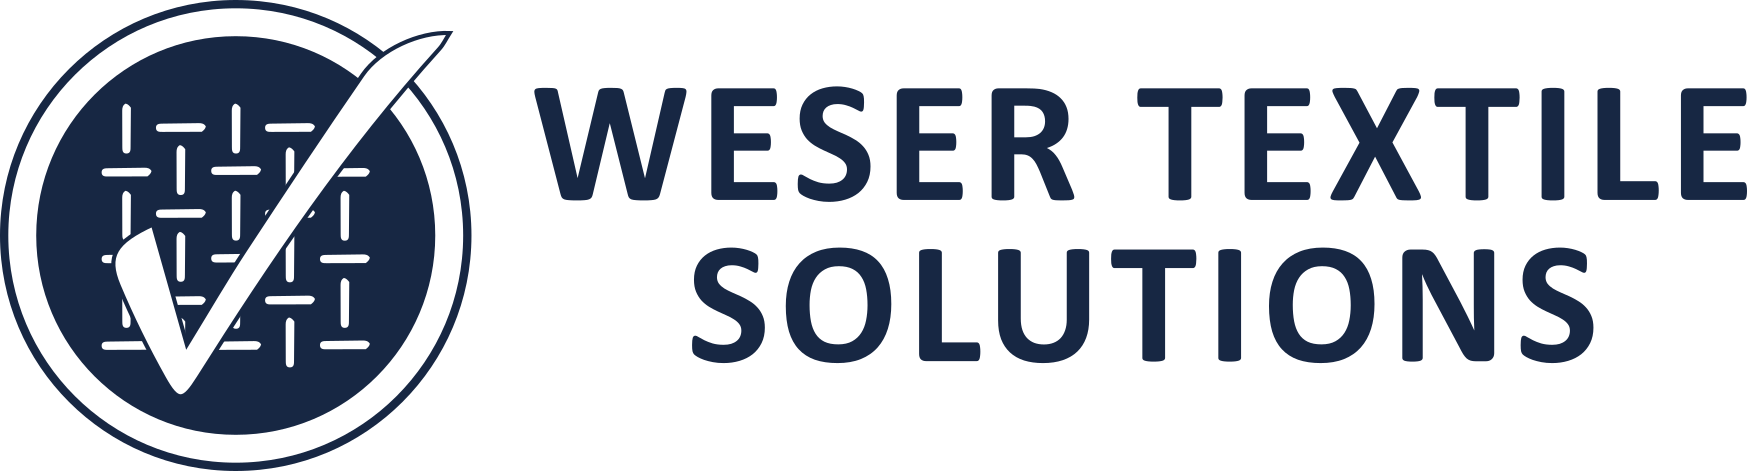 Weser Textile Solutions GmbH